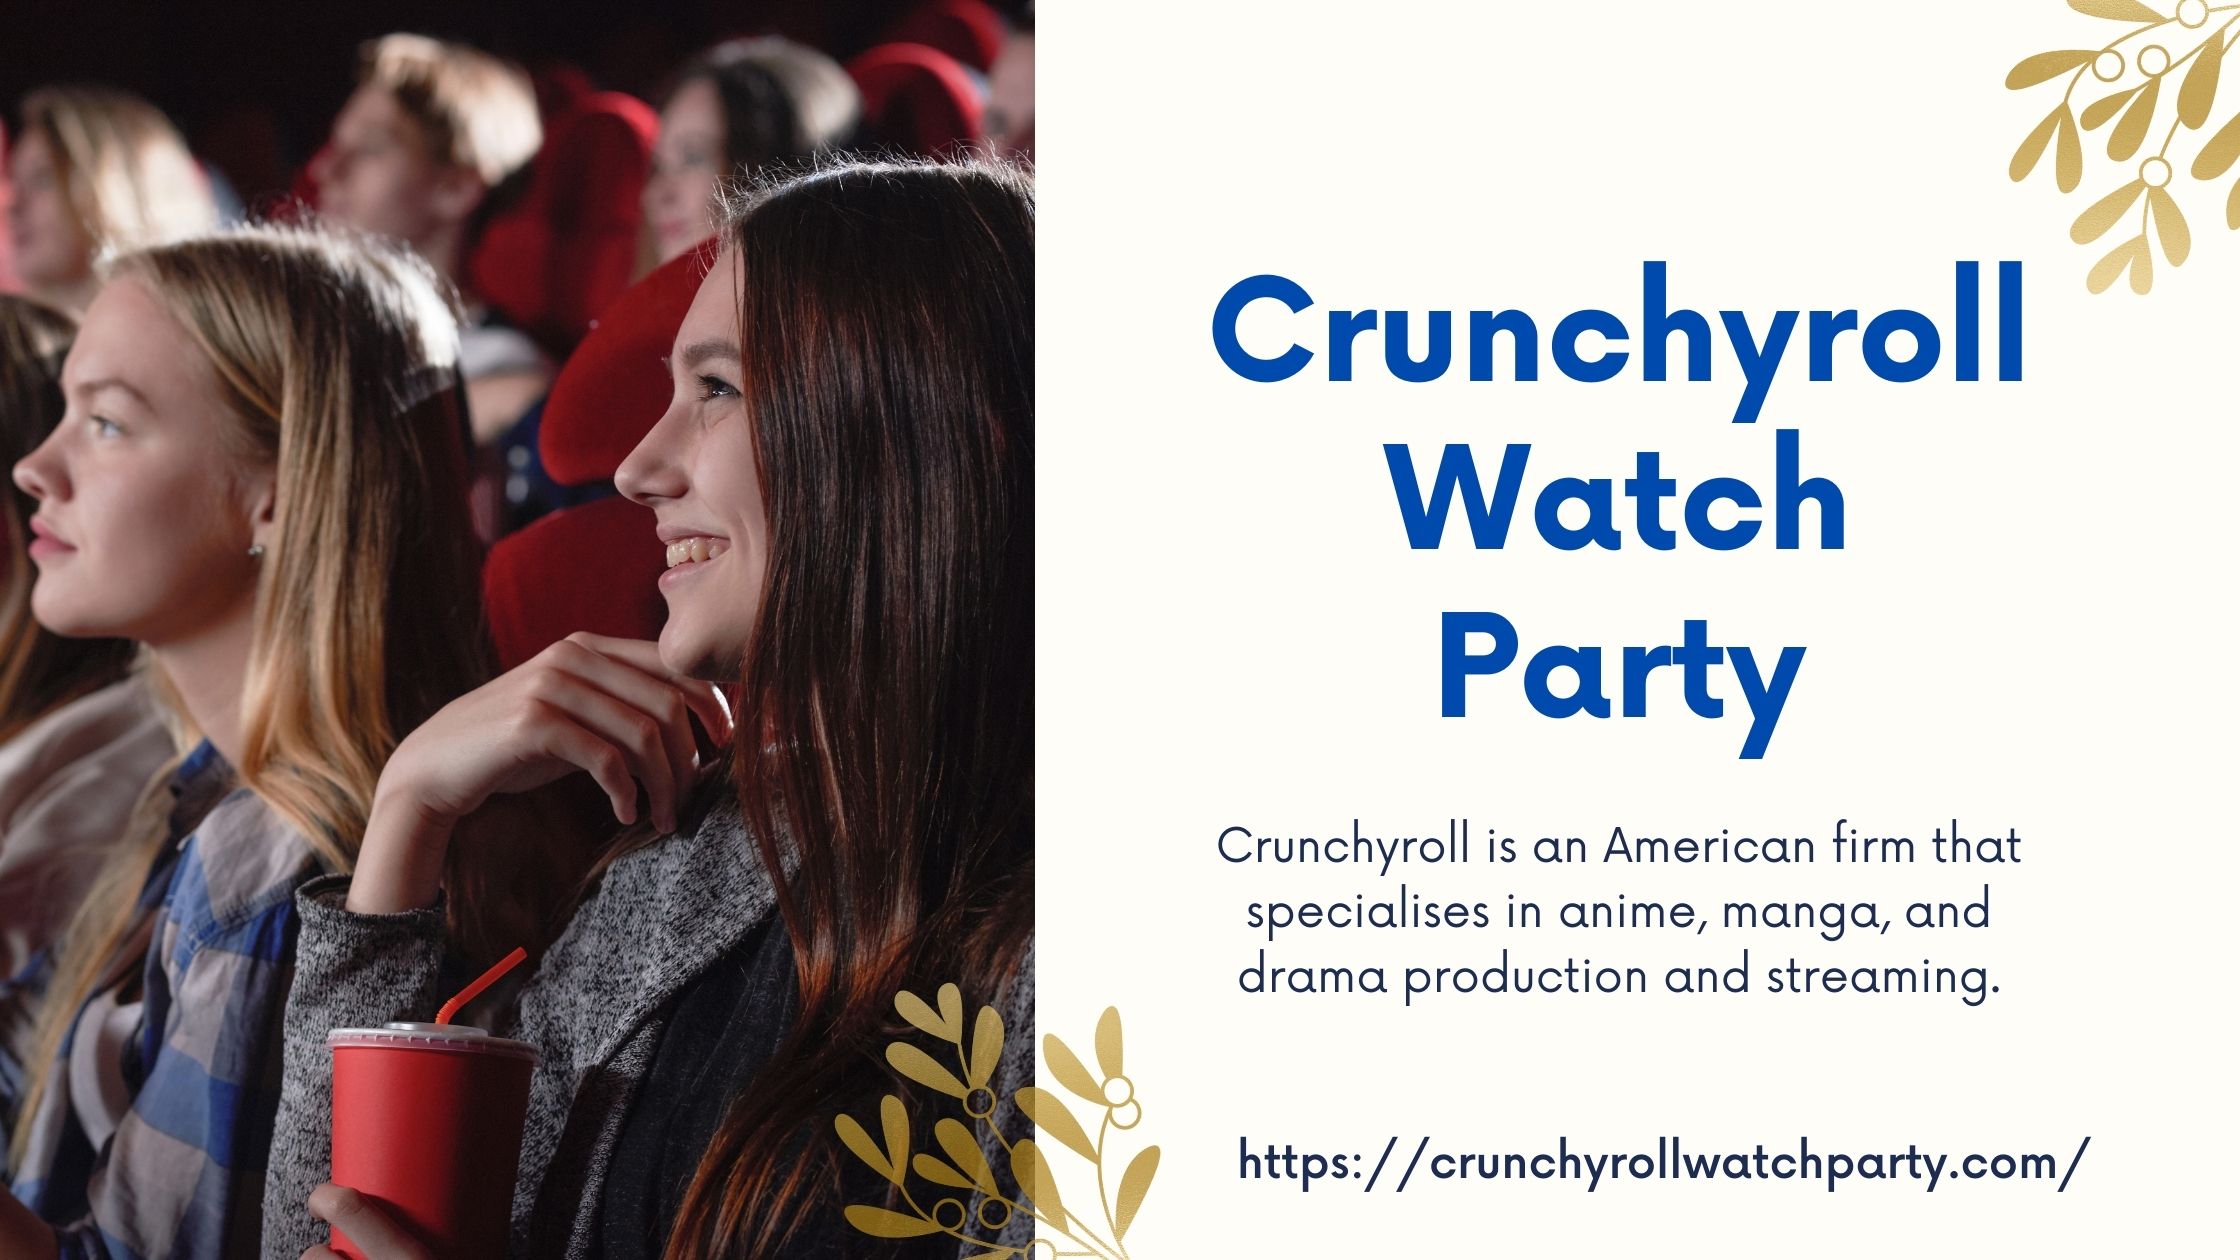 Crunchyroll Watch Parties have never looked better.